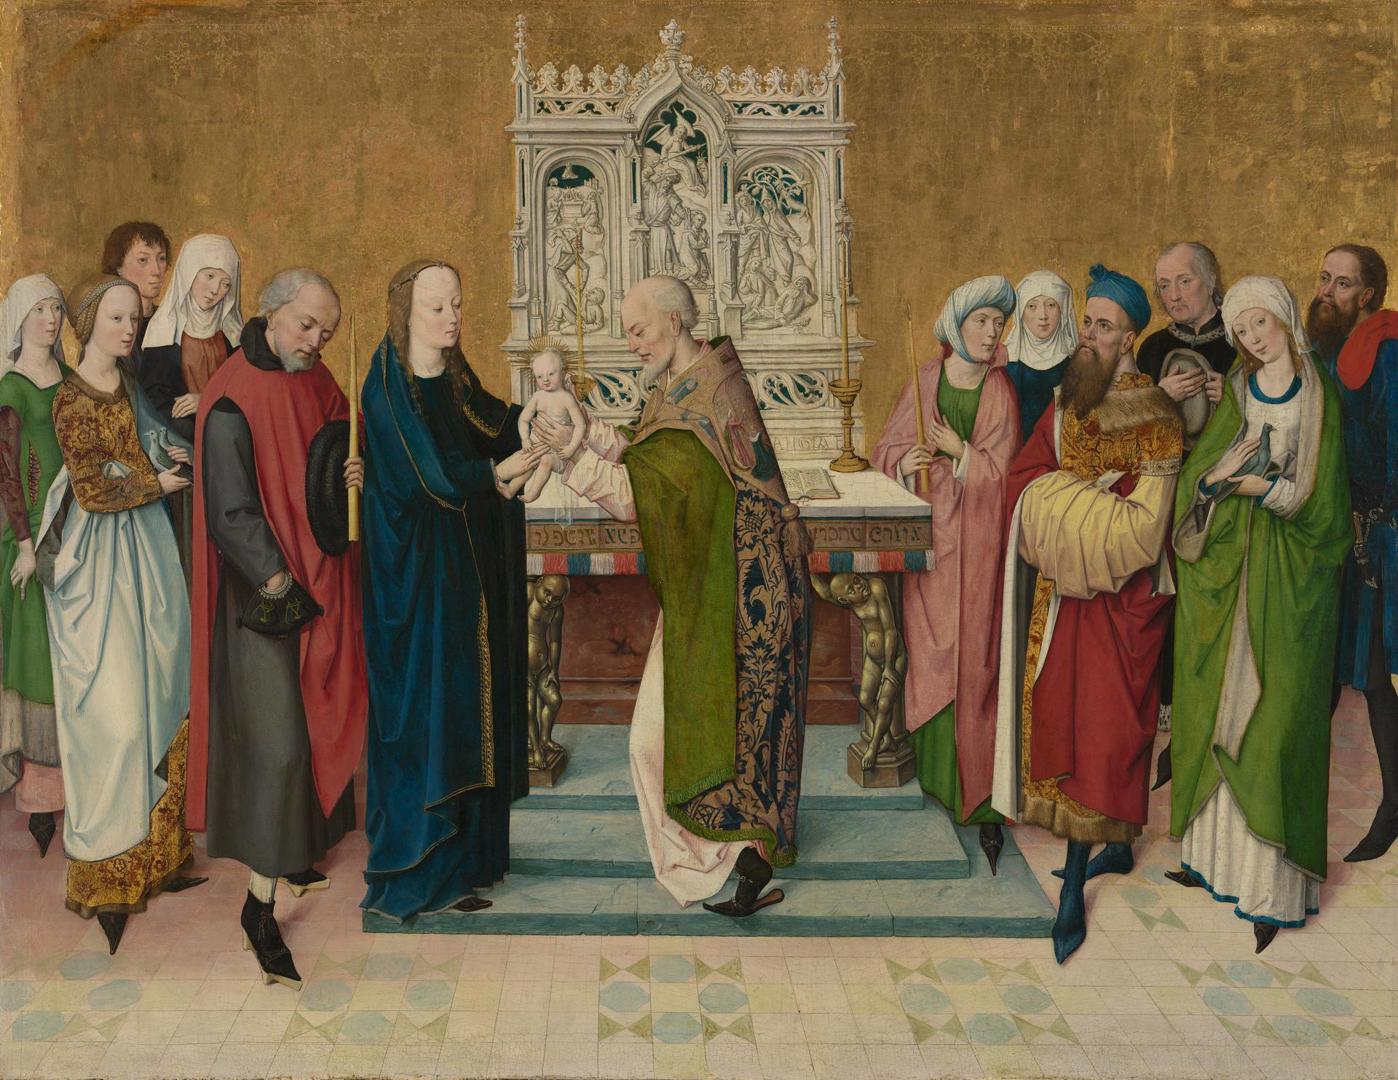 The Presentation in the Temple by Master of the Life of the Virgin